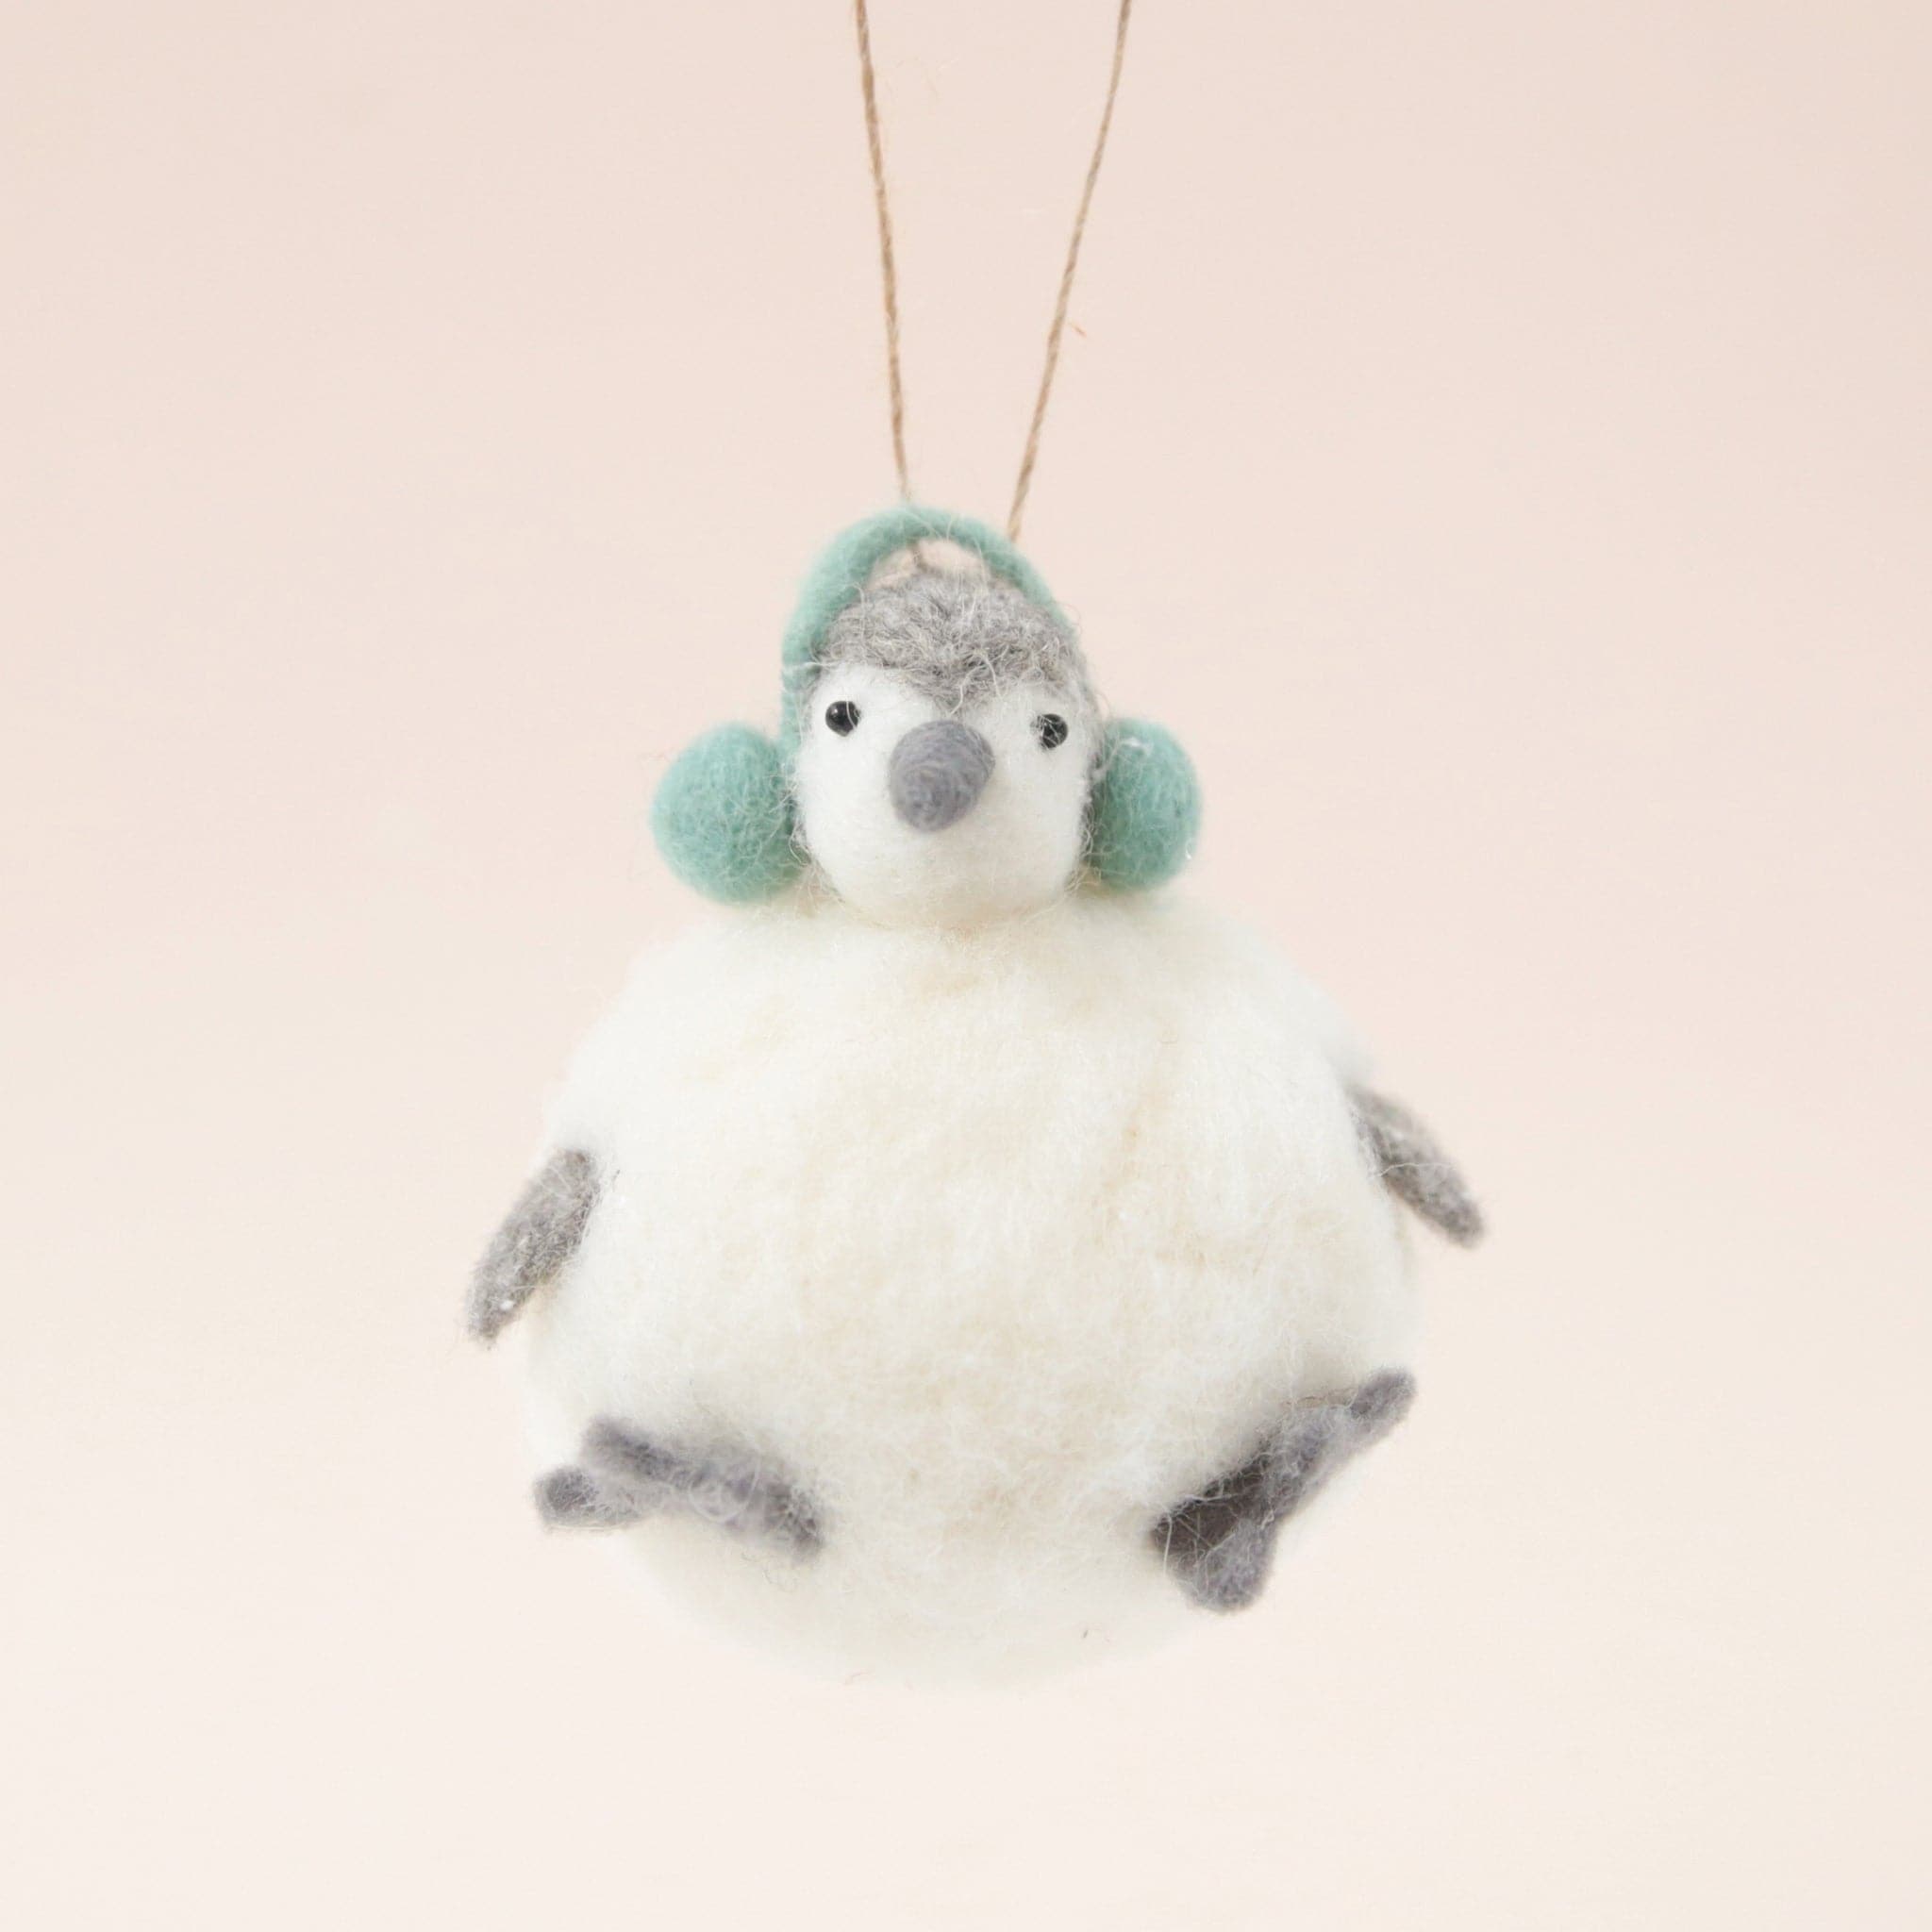 In front of a pink background is a felt penguin ornament. The body is a white, round body. It has two little gray feet and two gray hands. On top is a little white and gray head with a gray nose, two black eyes and green ear muffs.